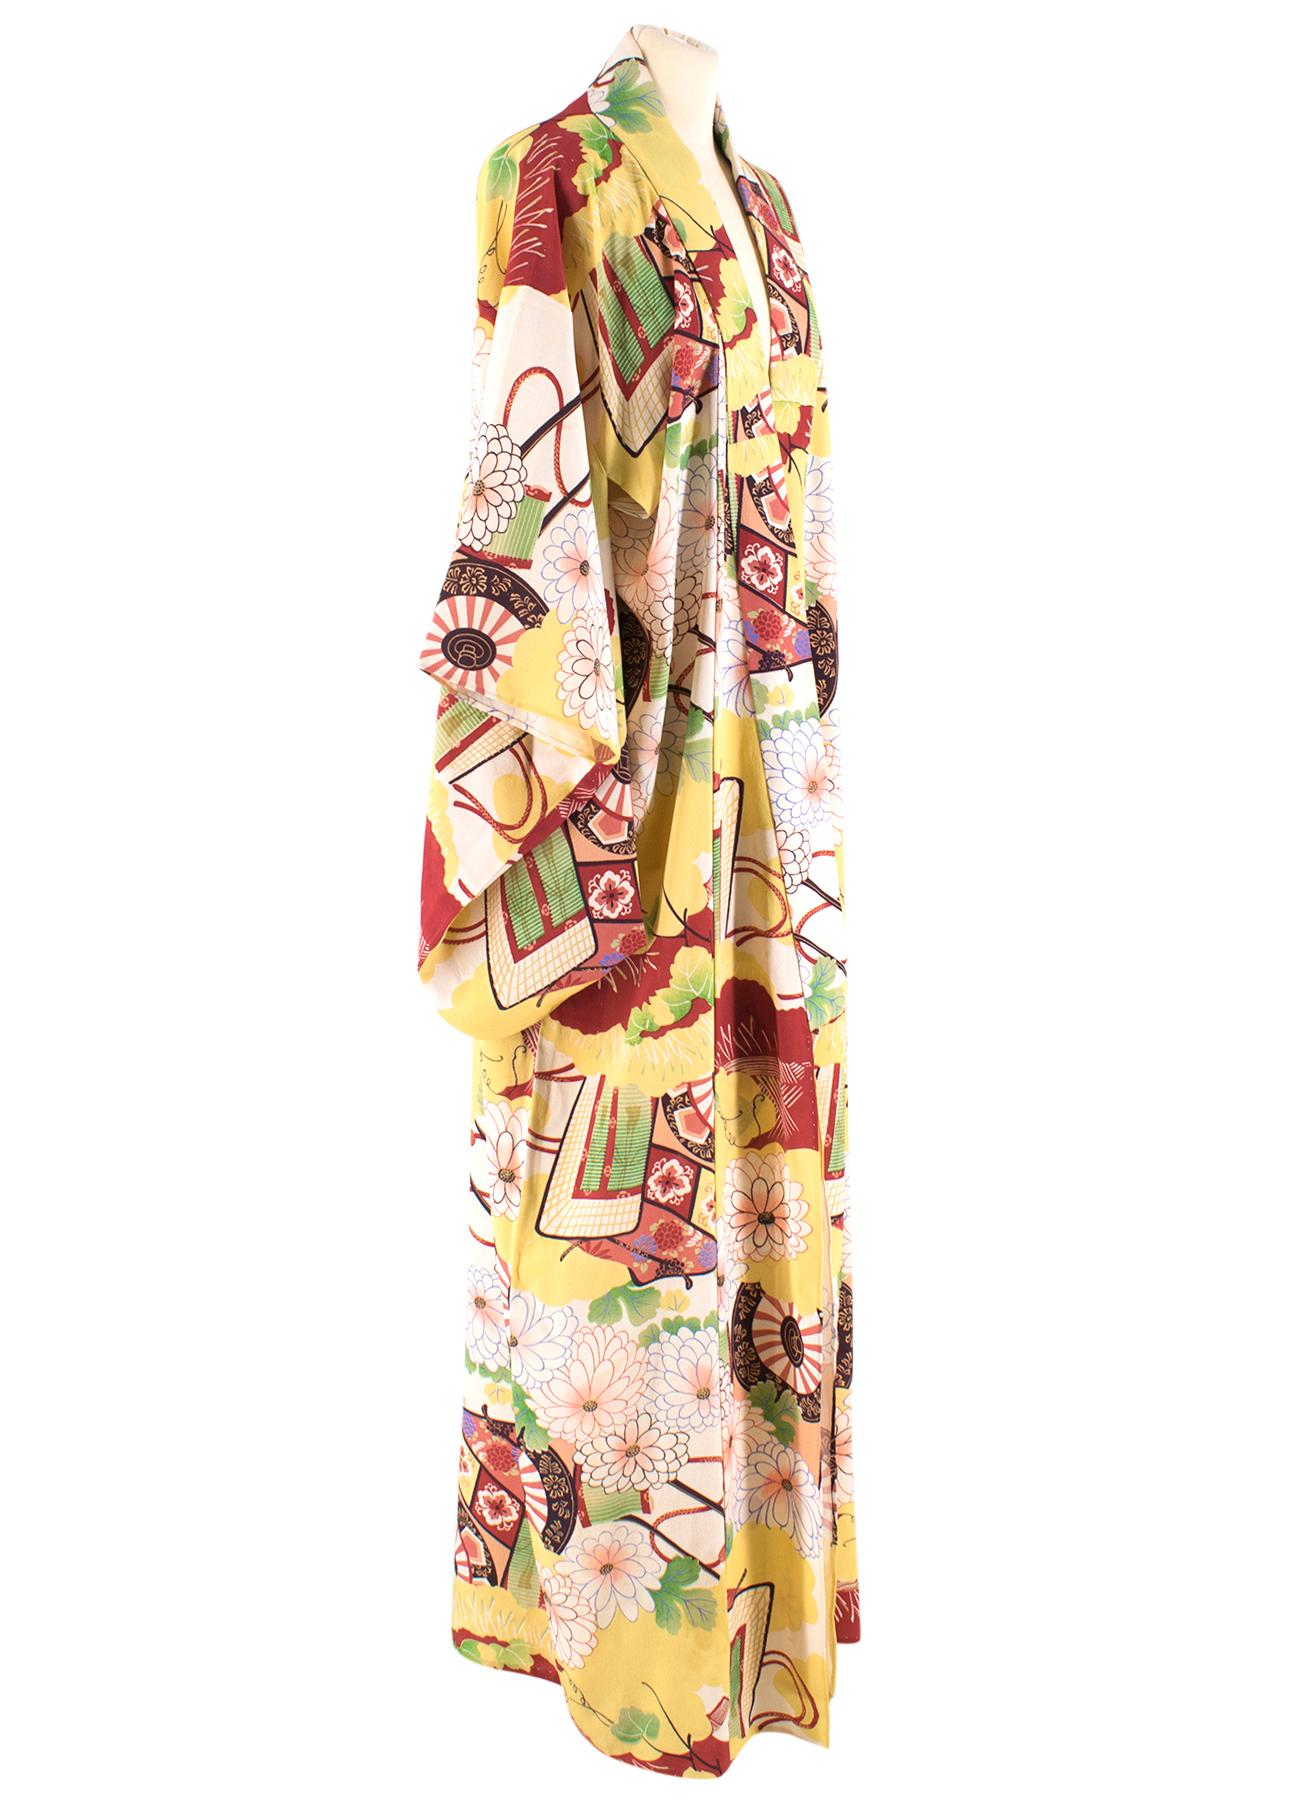 Bespoke Floral Yellow Silk Blend Kimono

- silk blend kimono 
- floral pattern in yellow and red colours
- unlined
- no fastening

Please note, these items are pre-owned and may show some signs of storage, even when unworn and unused. This is